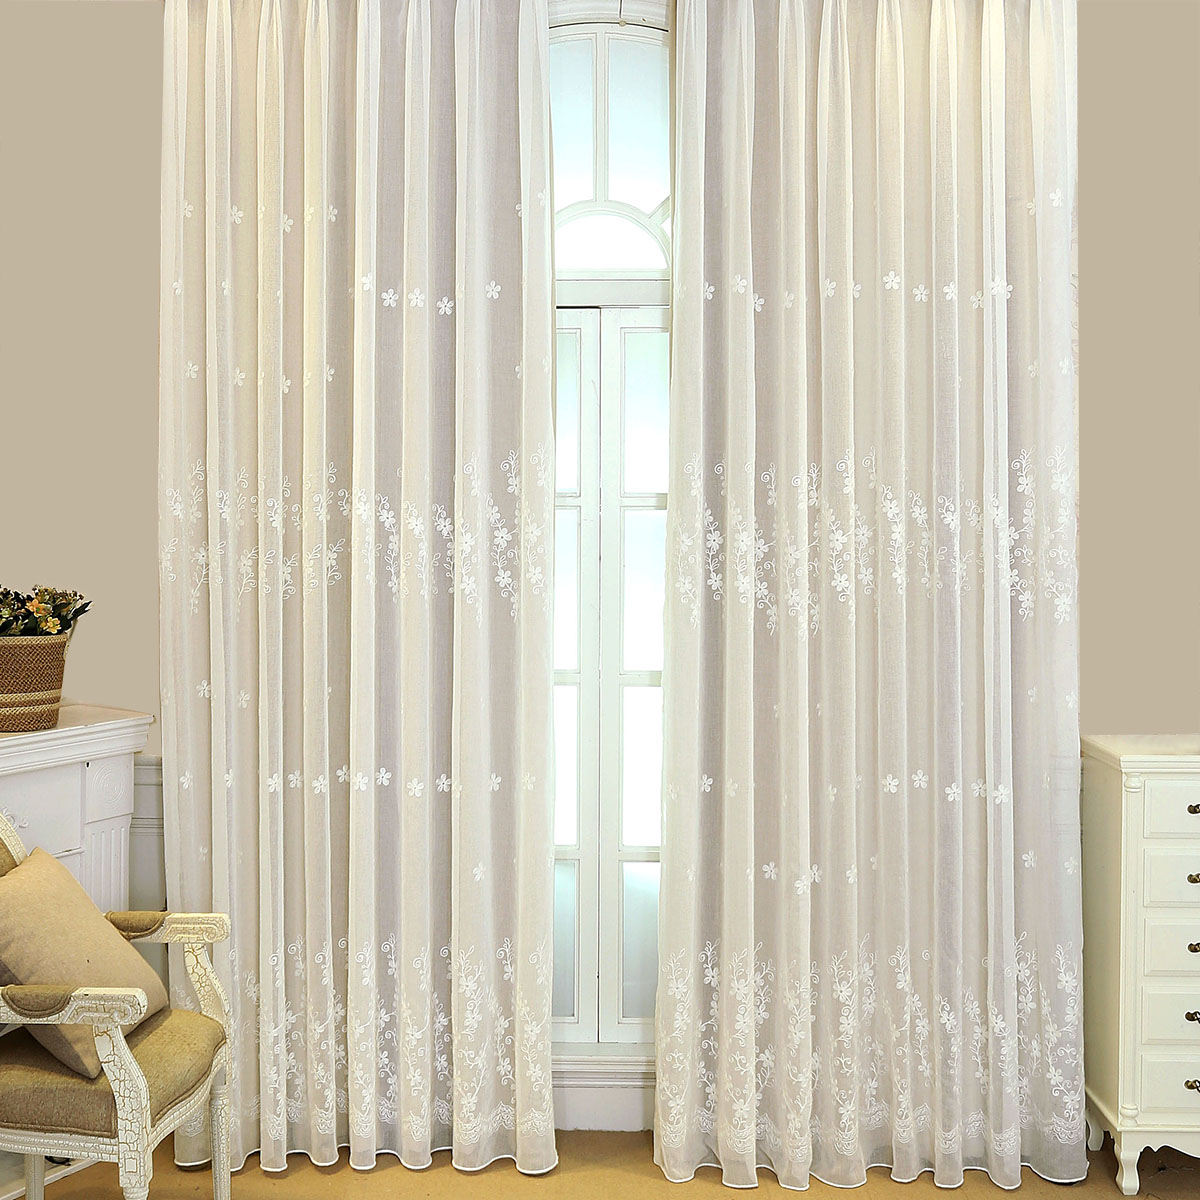 How to choose linings for voile curtains